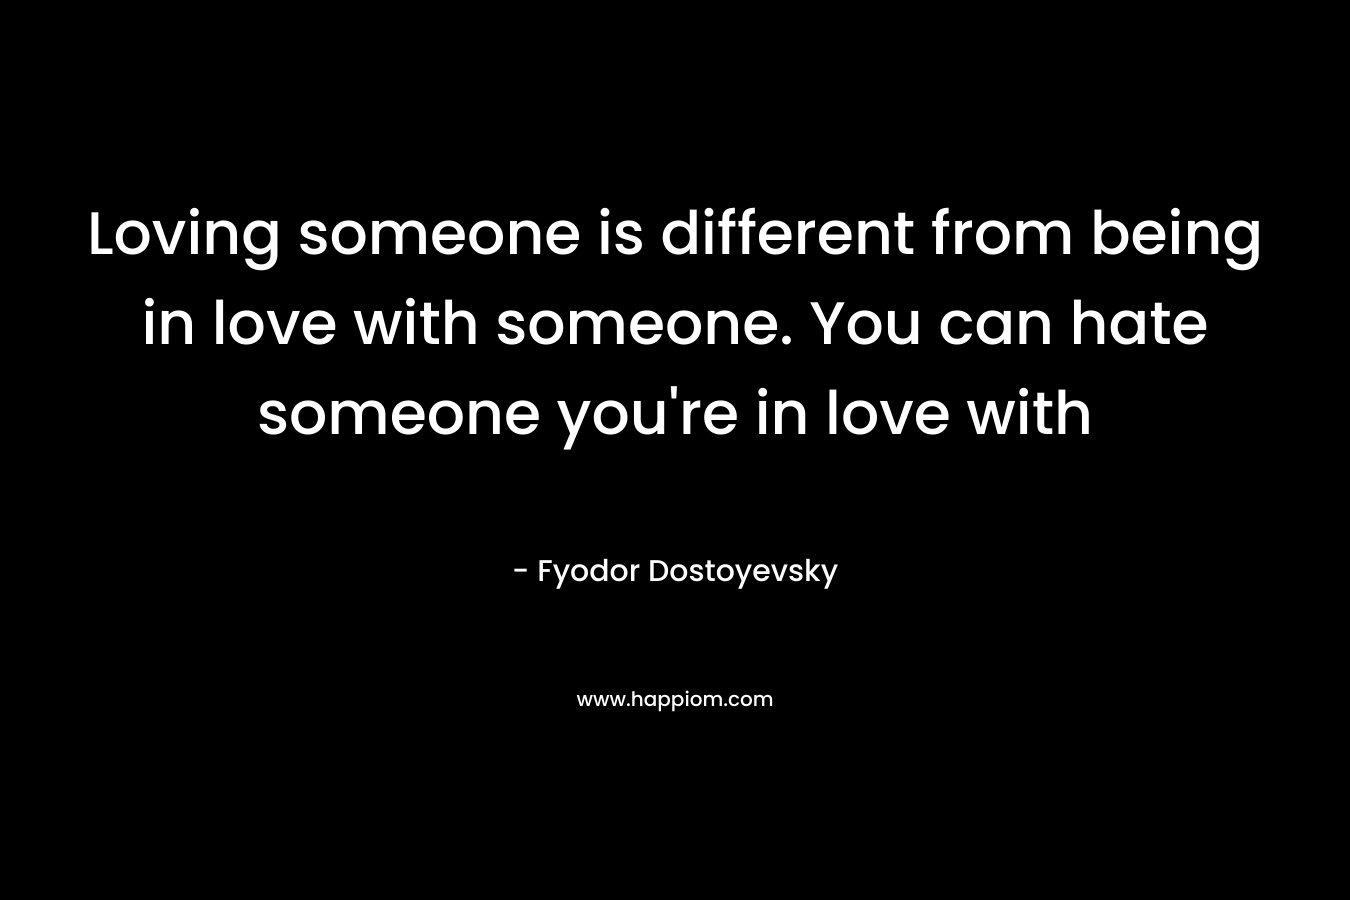 Loving someone is different from being in love with someone. You can hate someone you're in love with